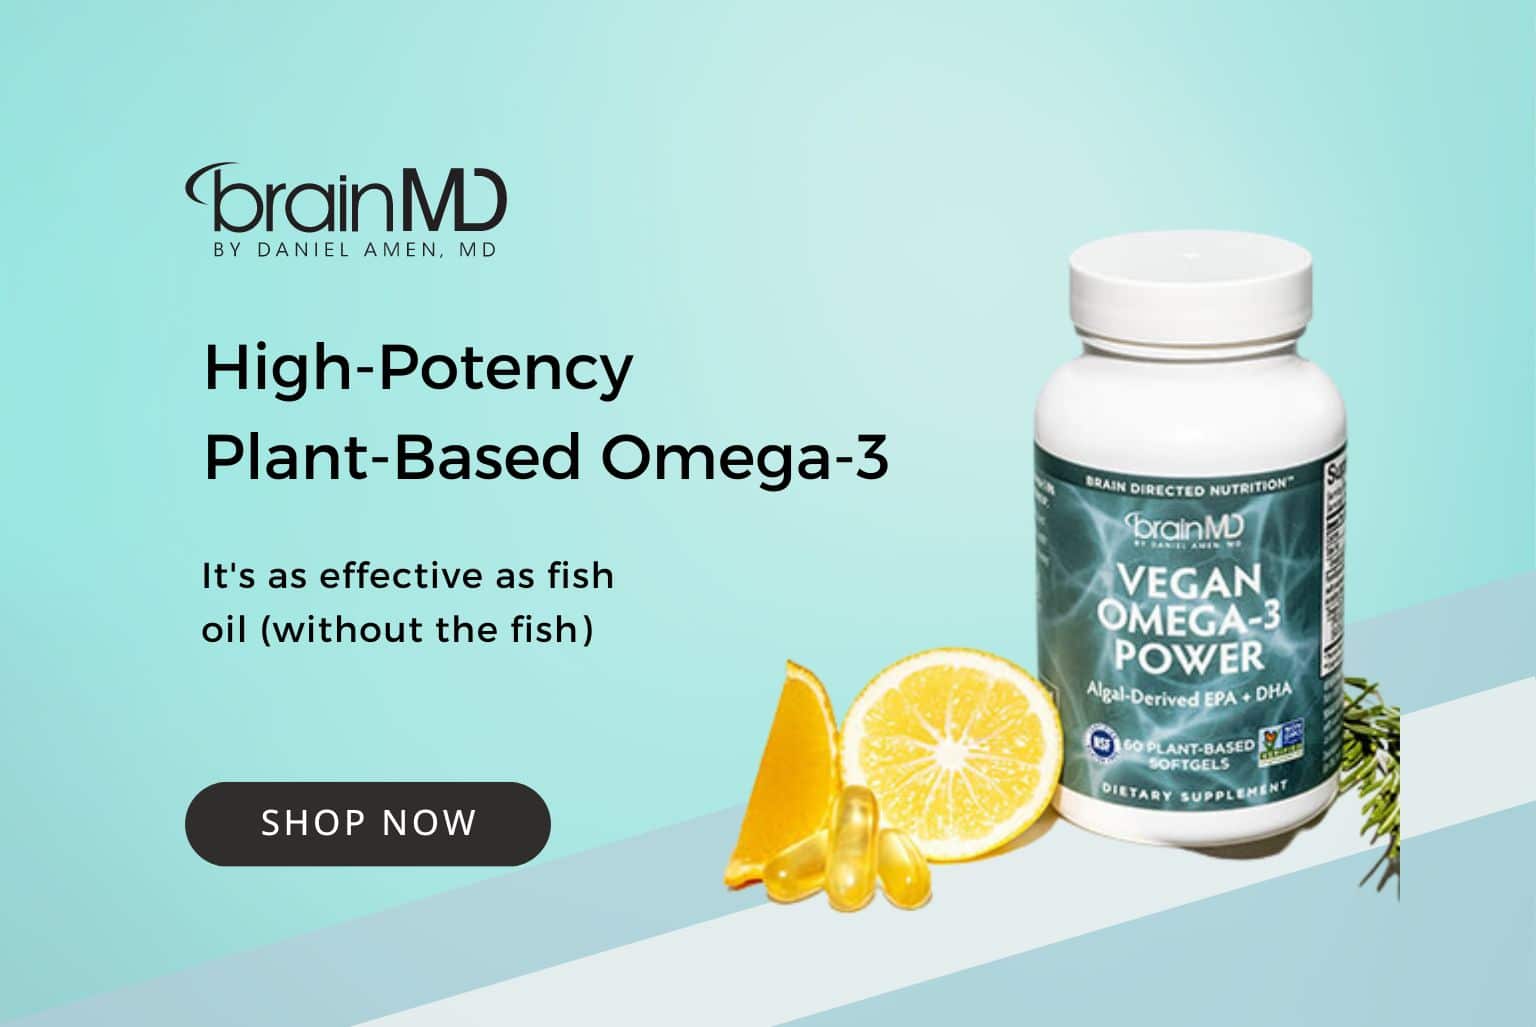 Click here to get the most concentrated vegan source of omega-3 fatty acids available to power your mood, focus, cognition, & heart. Derived from fresh, ultra-pure, sustainable marine algae.